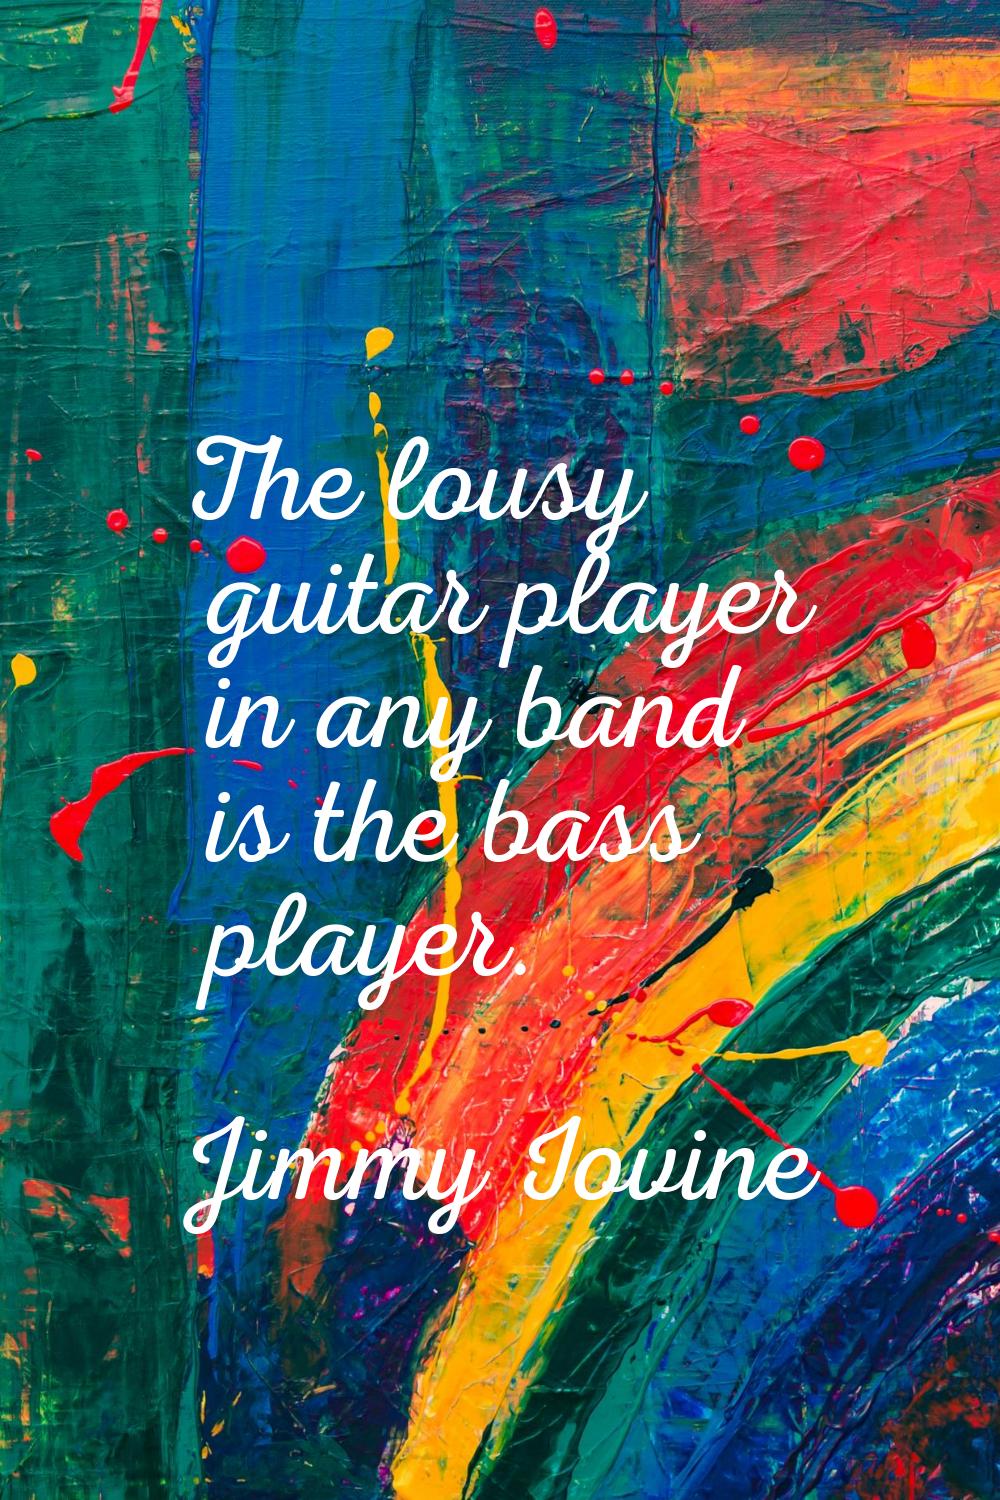 The lousy guitar player in any band is the bass player.